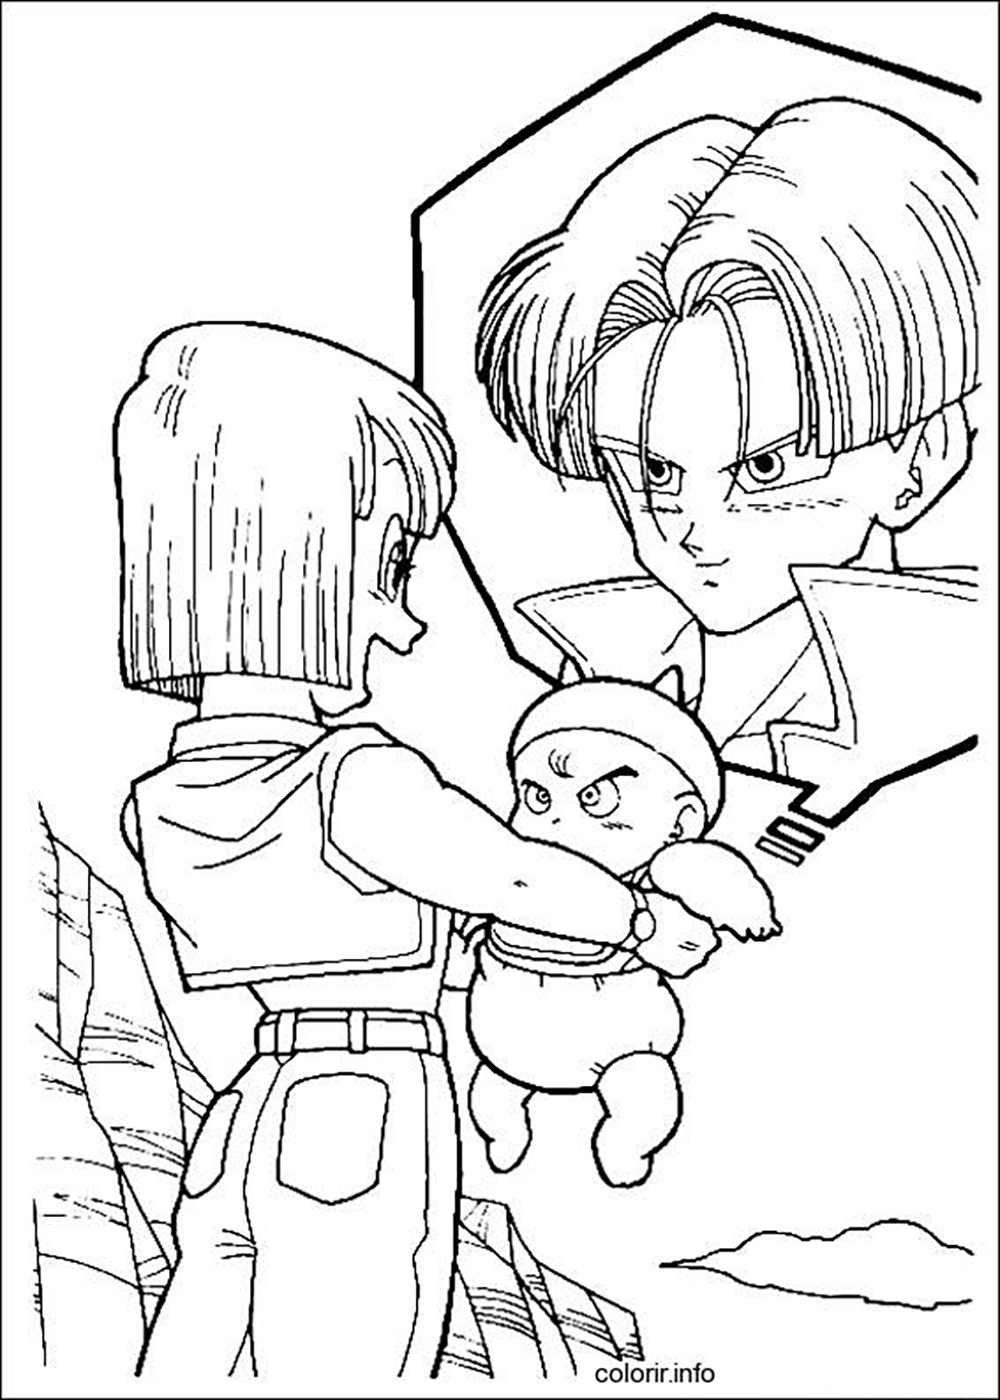 Dragon Ball Z coloring page to print and color : Trunks and Bulma